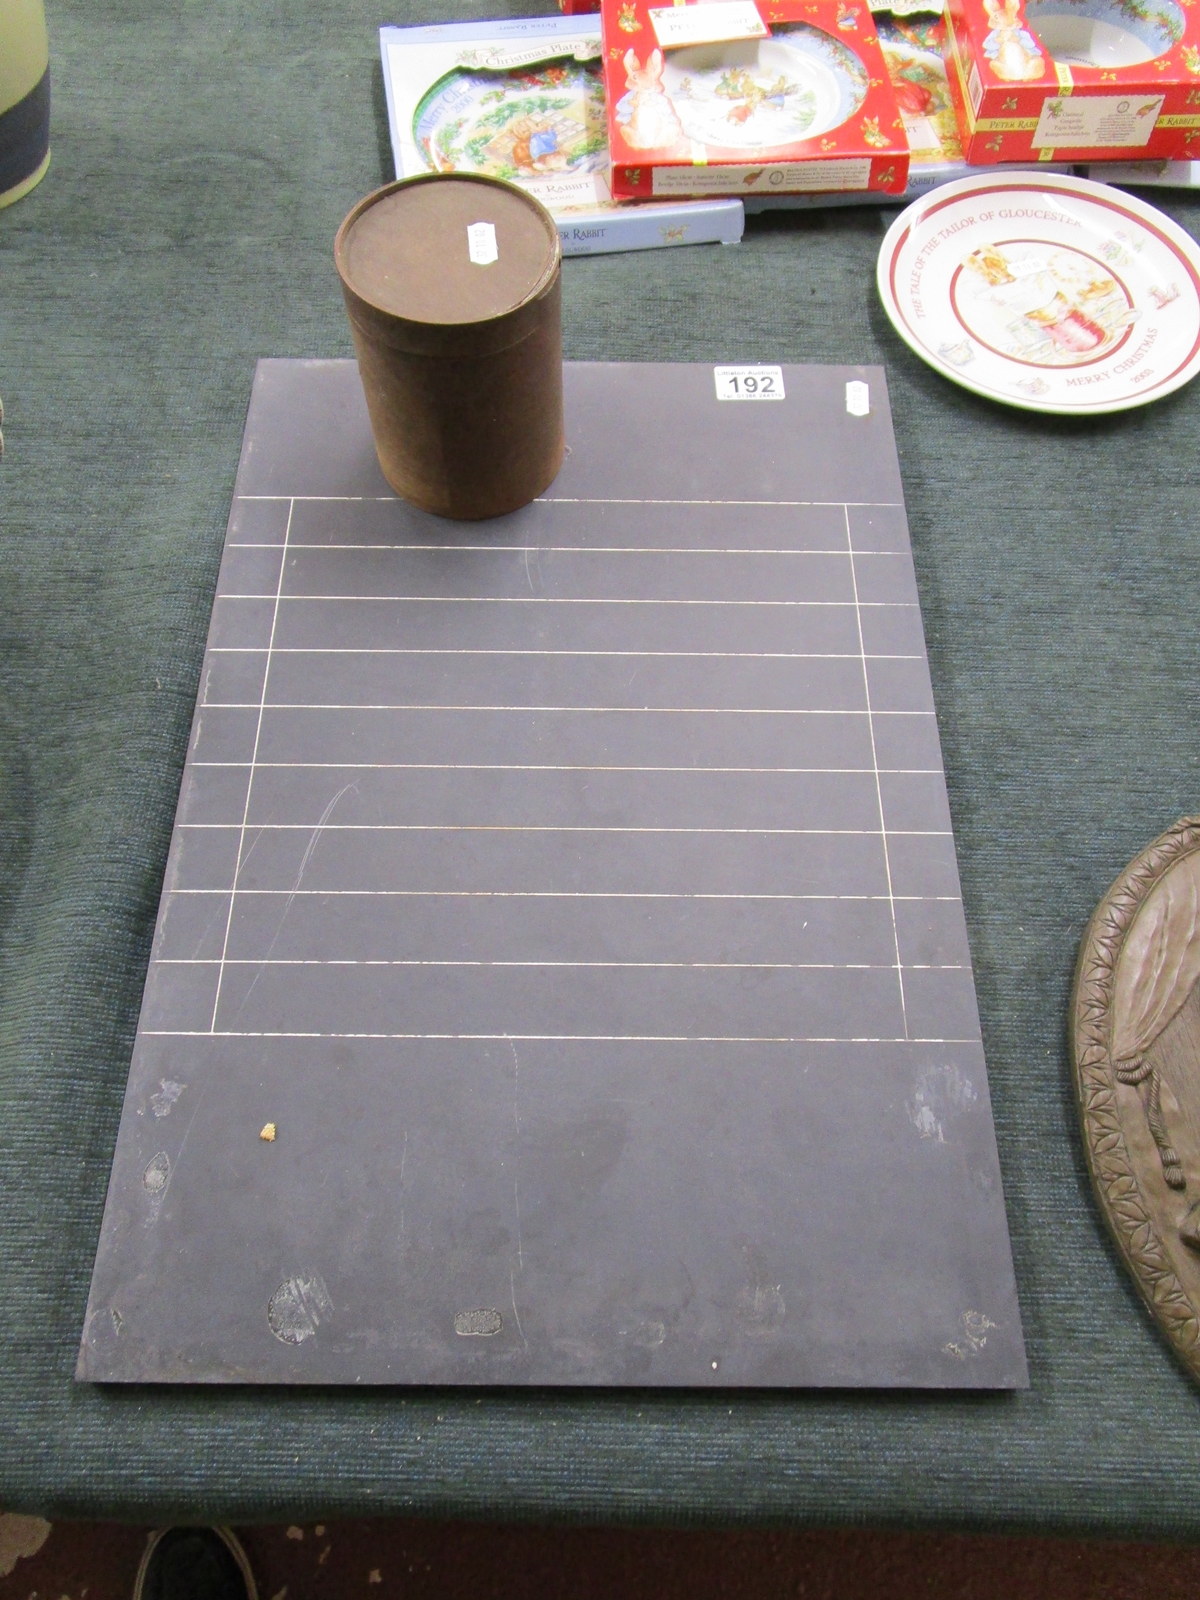 Slate 'shove halfpenny board' and container of counters